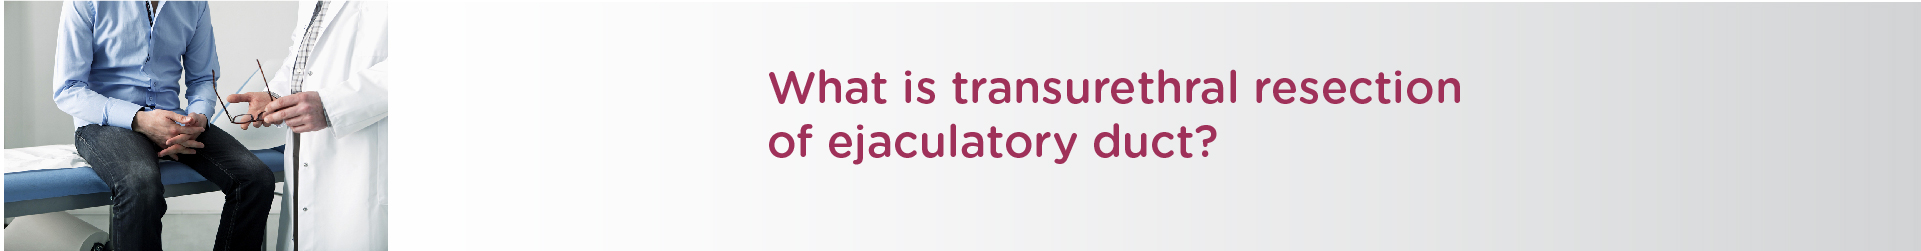 What is Transurethral Resection of Ejaculatory Duct?